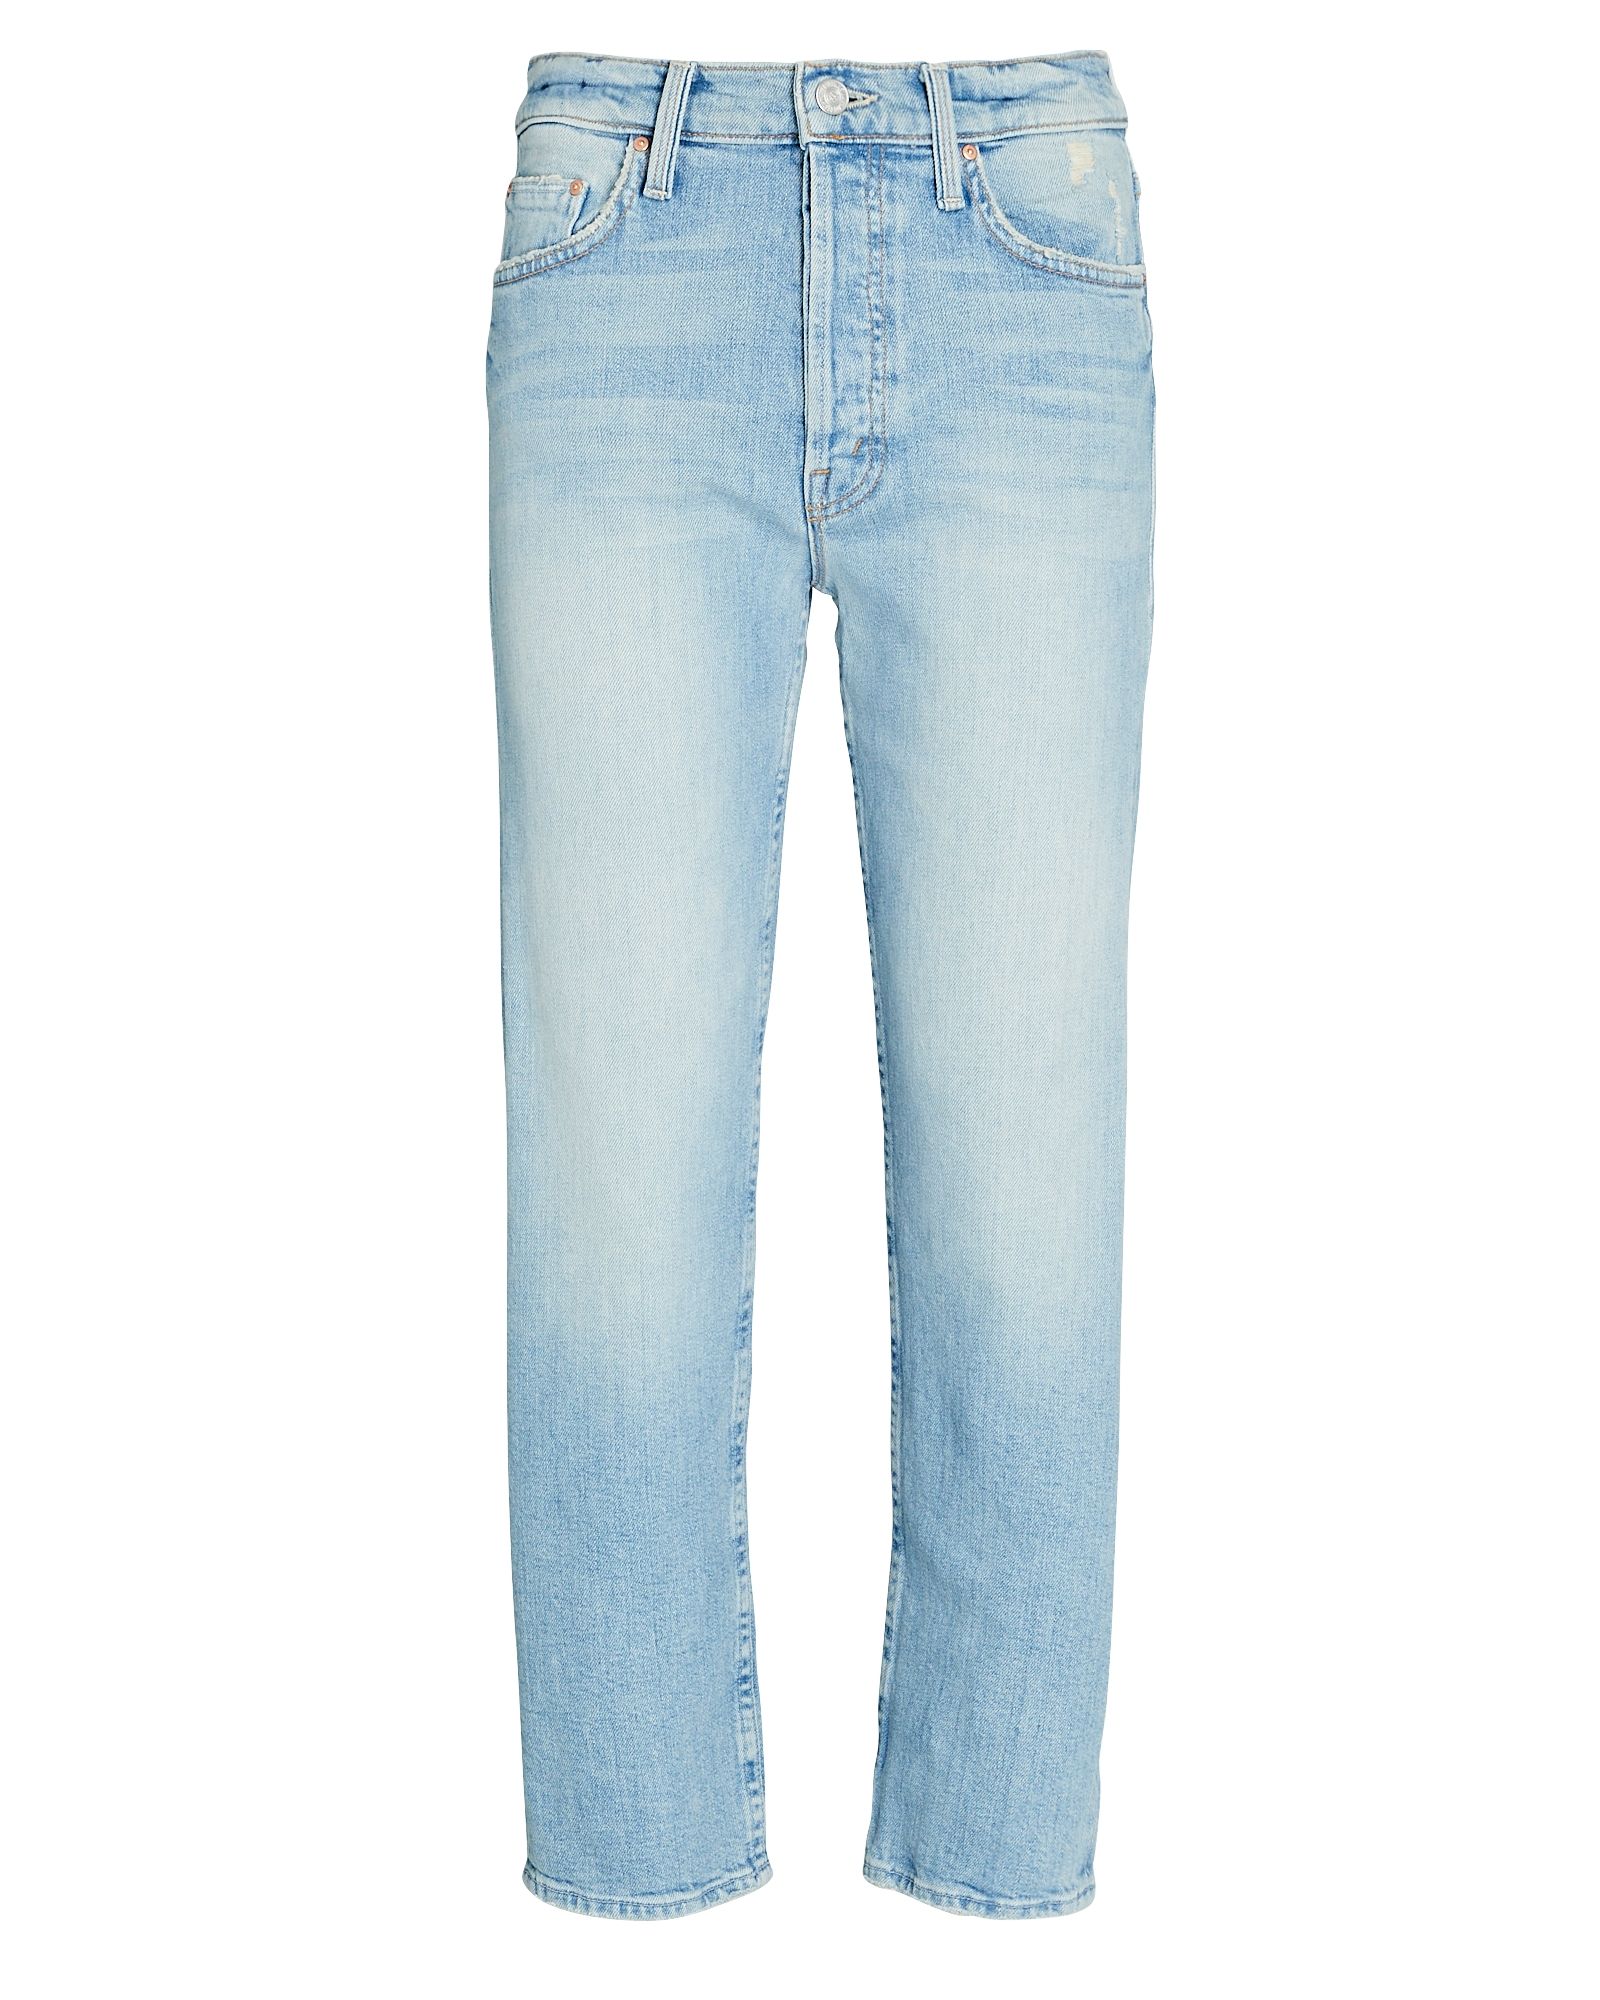 MOTHER The Tomcat Ankle Jeans, Bless You 29 | INTERMIX